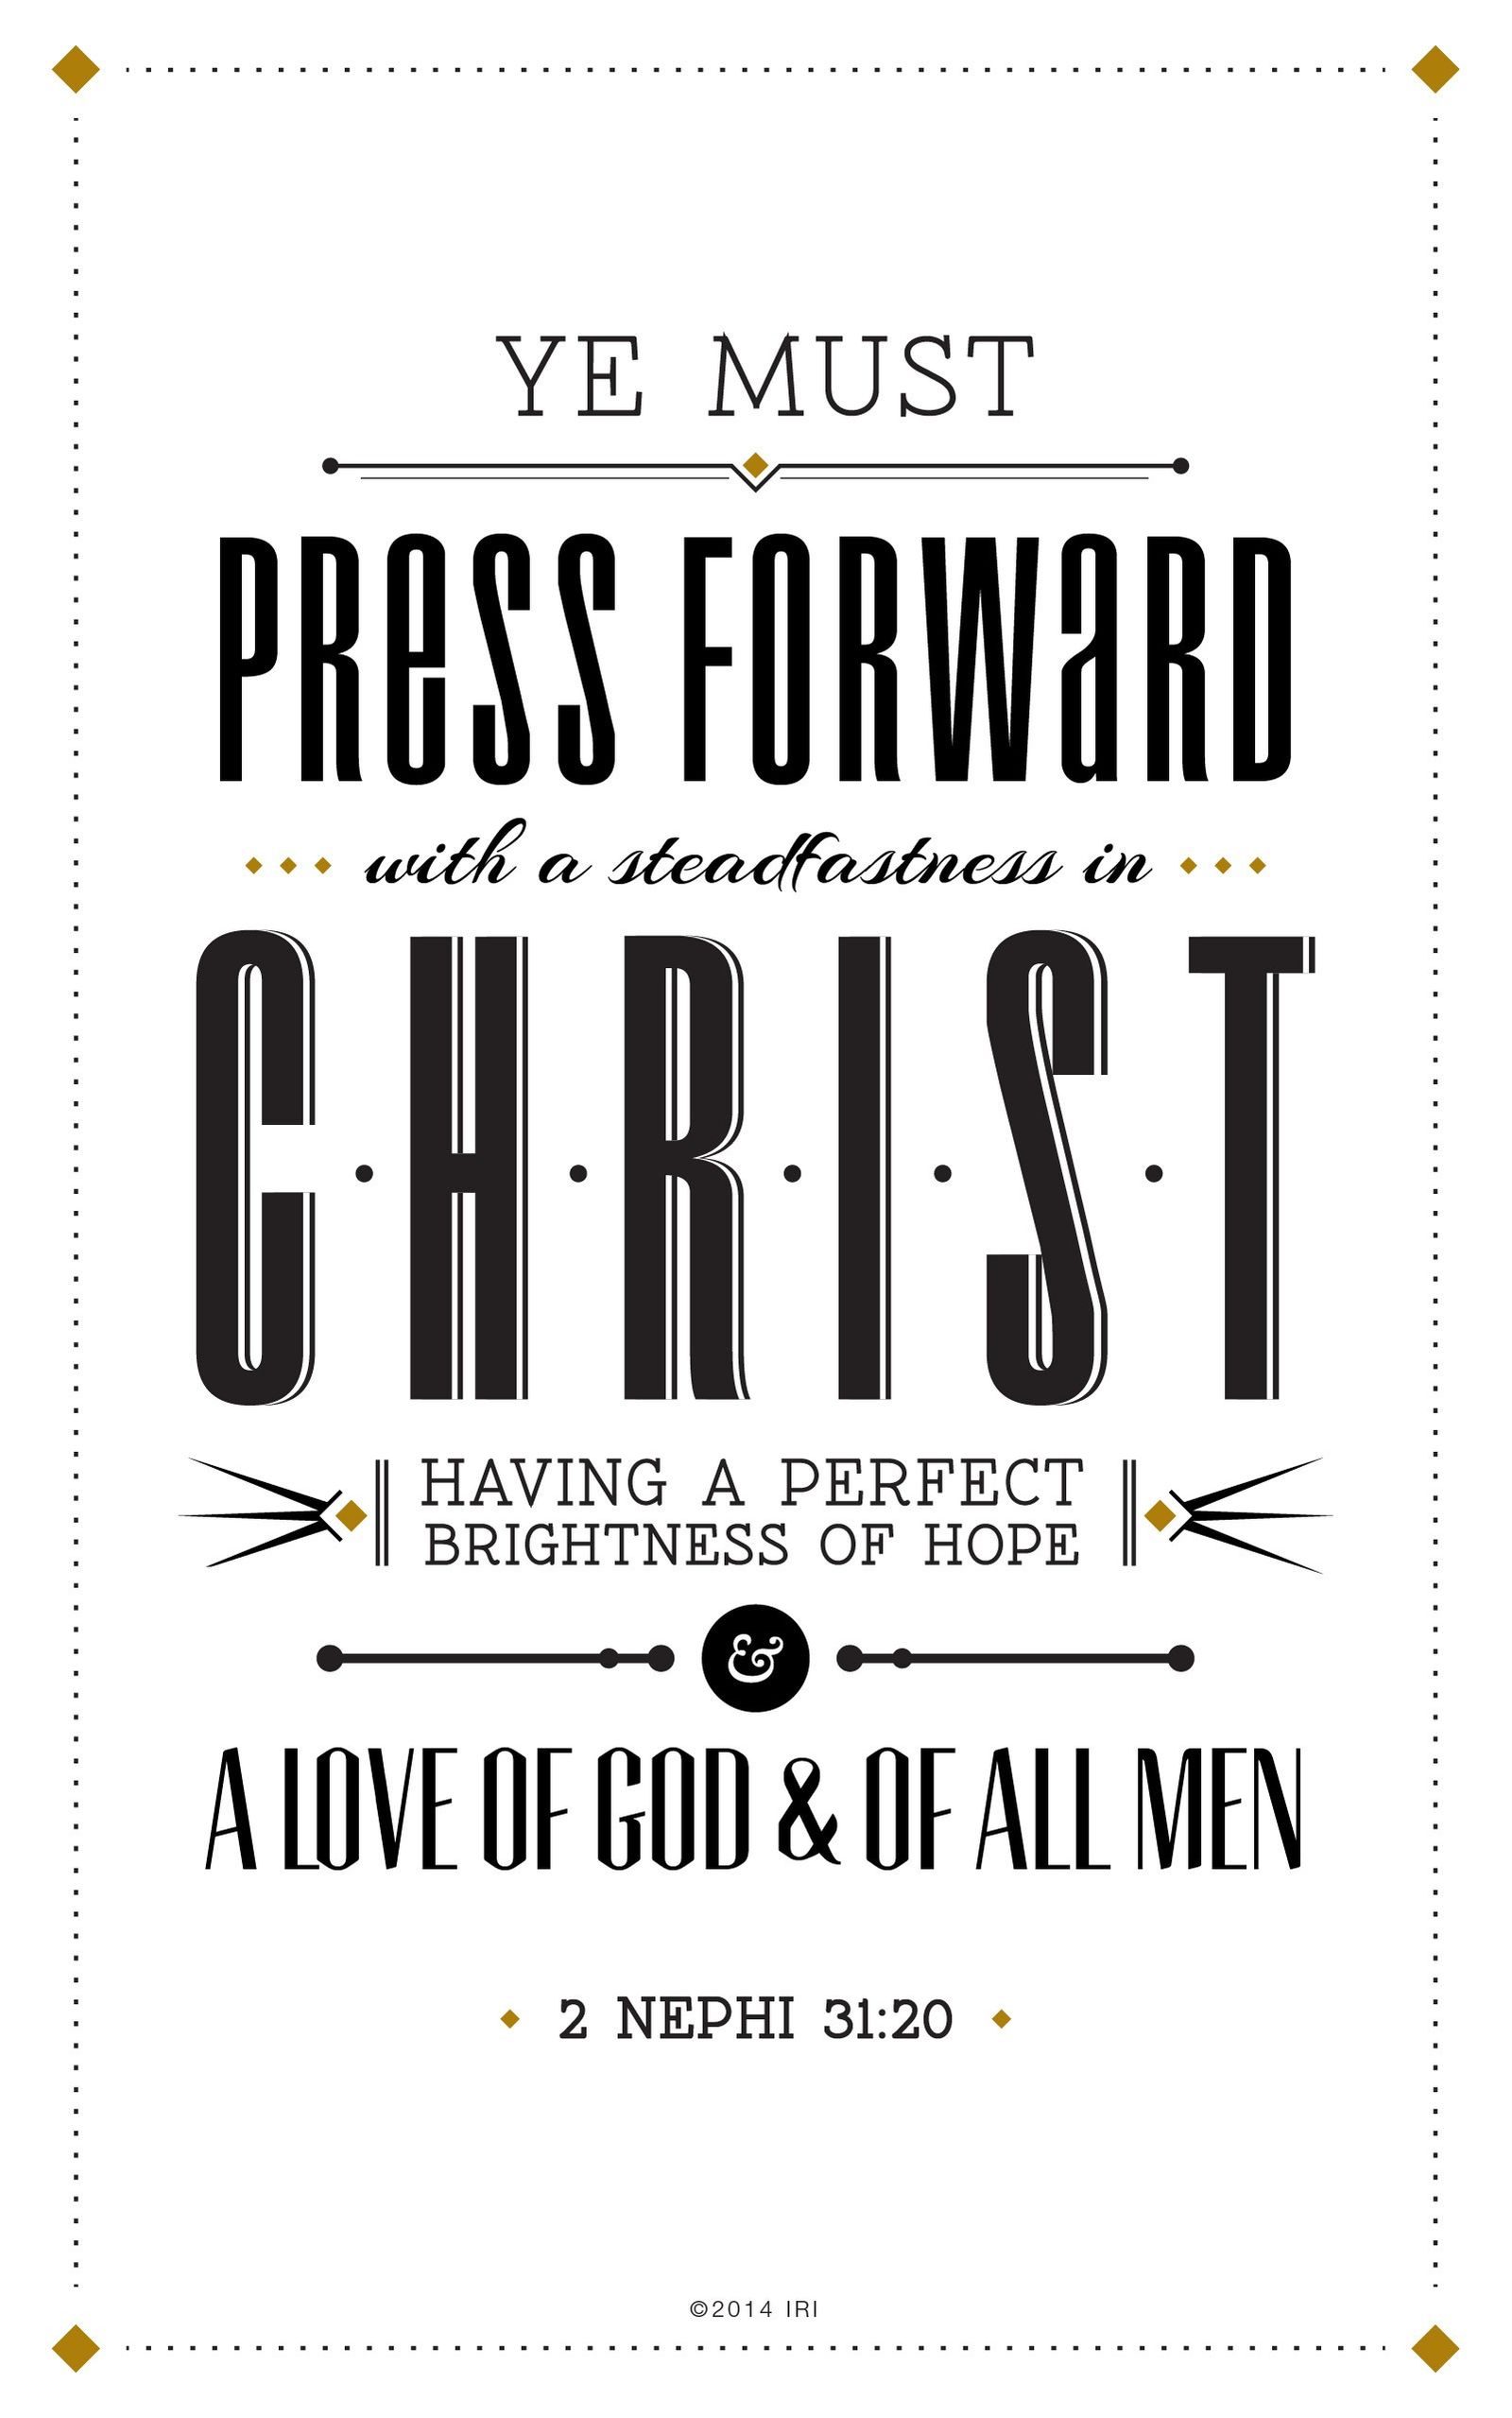 “Ye must press forward with a steadfastness in Christ, having a perfect brightness of hope, and a love of God and of all men.”—2 Nephi 31:20